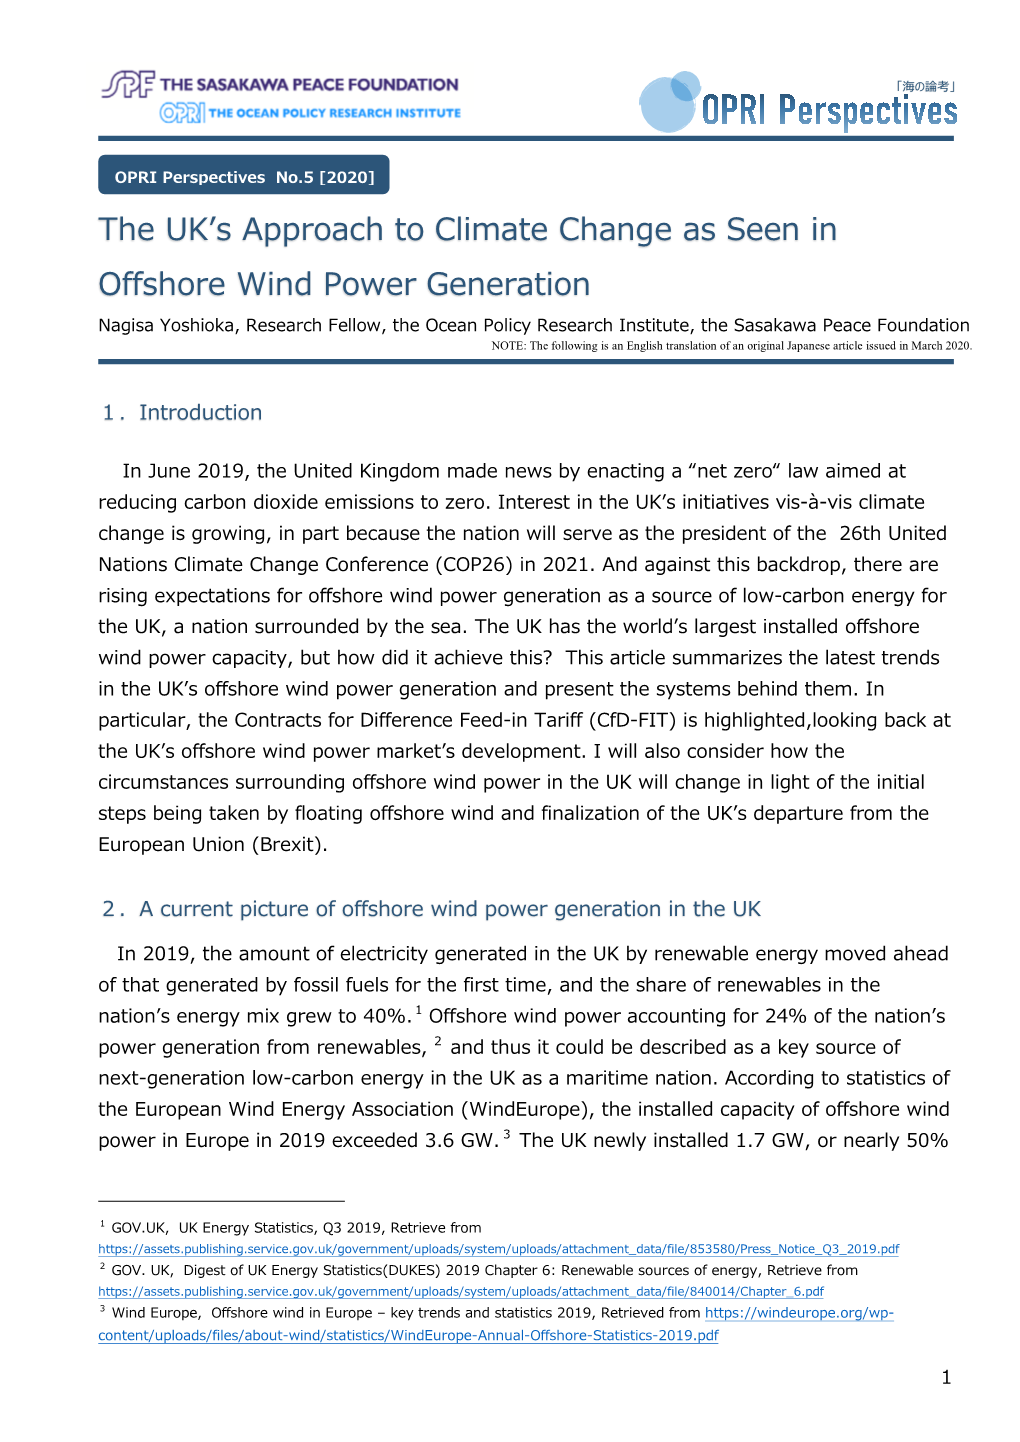 The UK's Approach to Climate Change As Seen in Offshore Wind